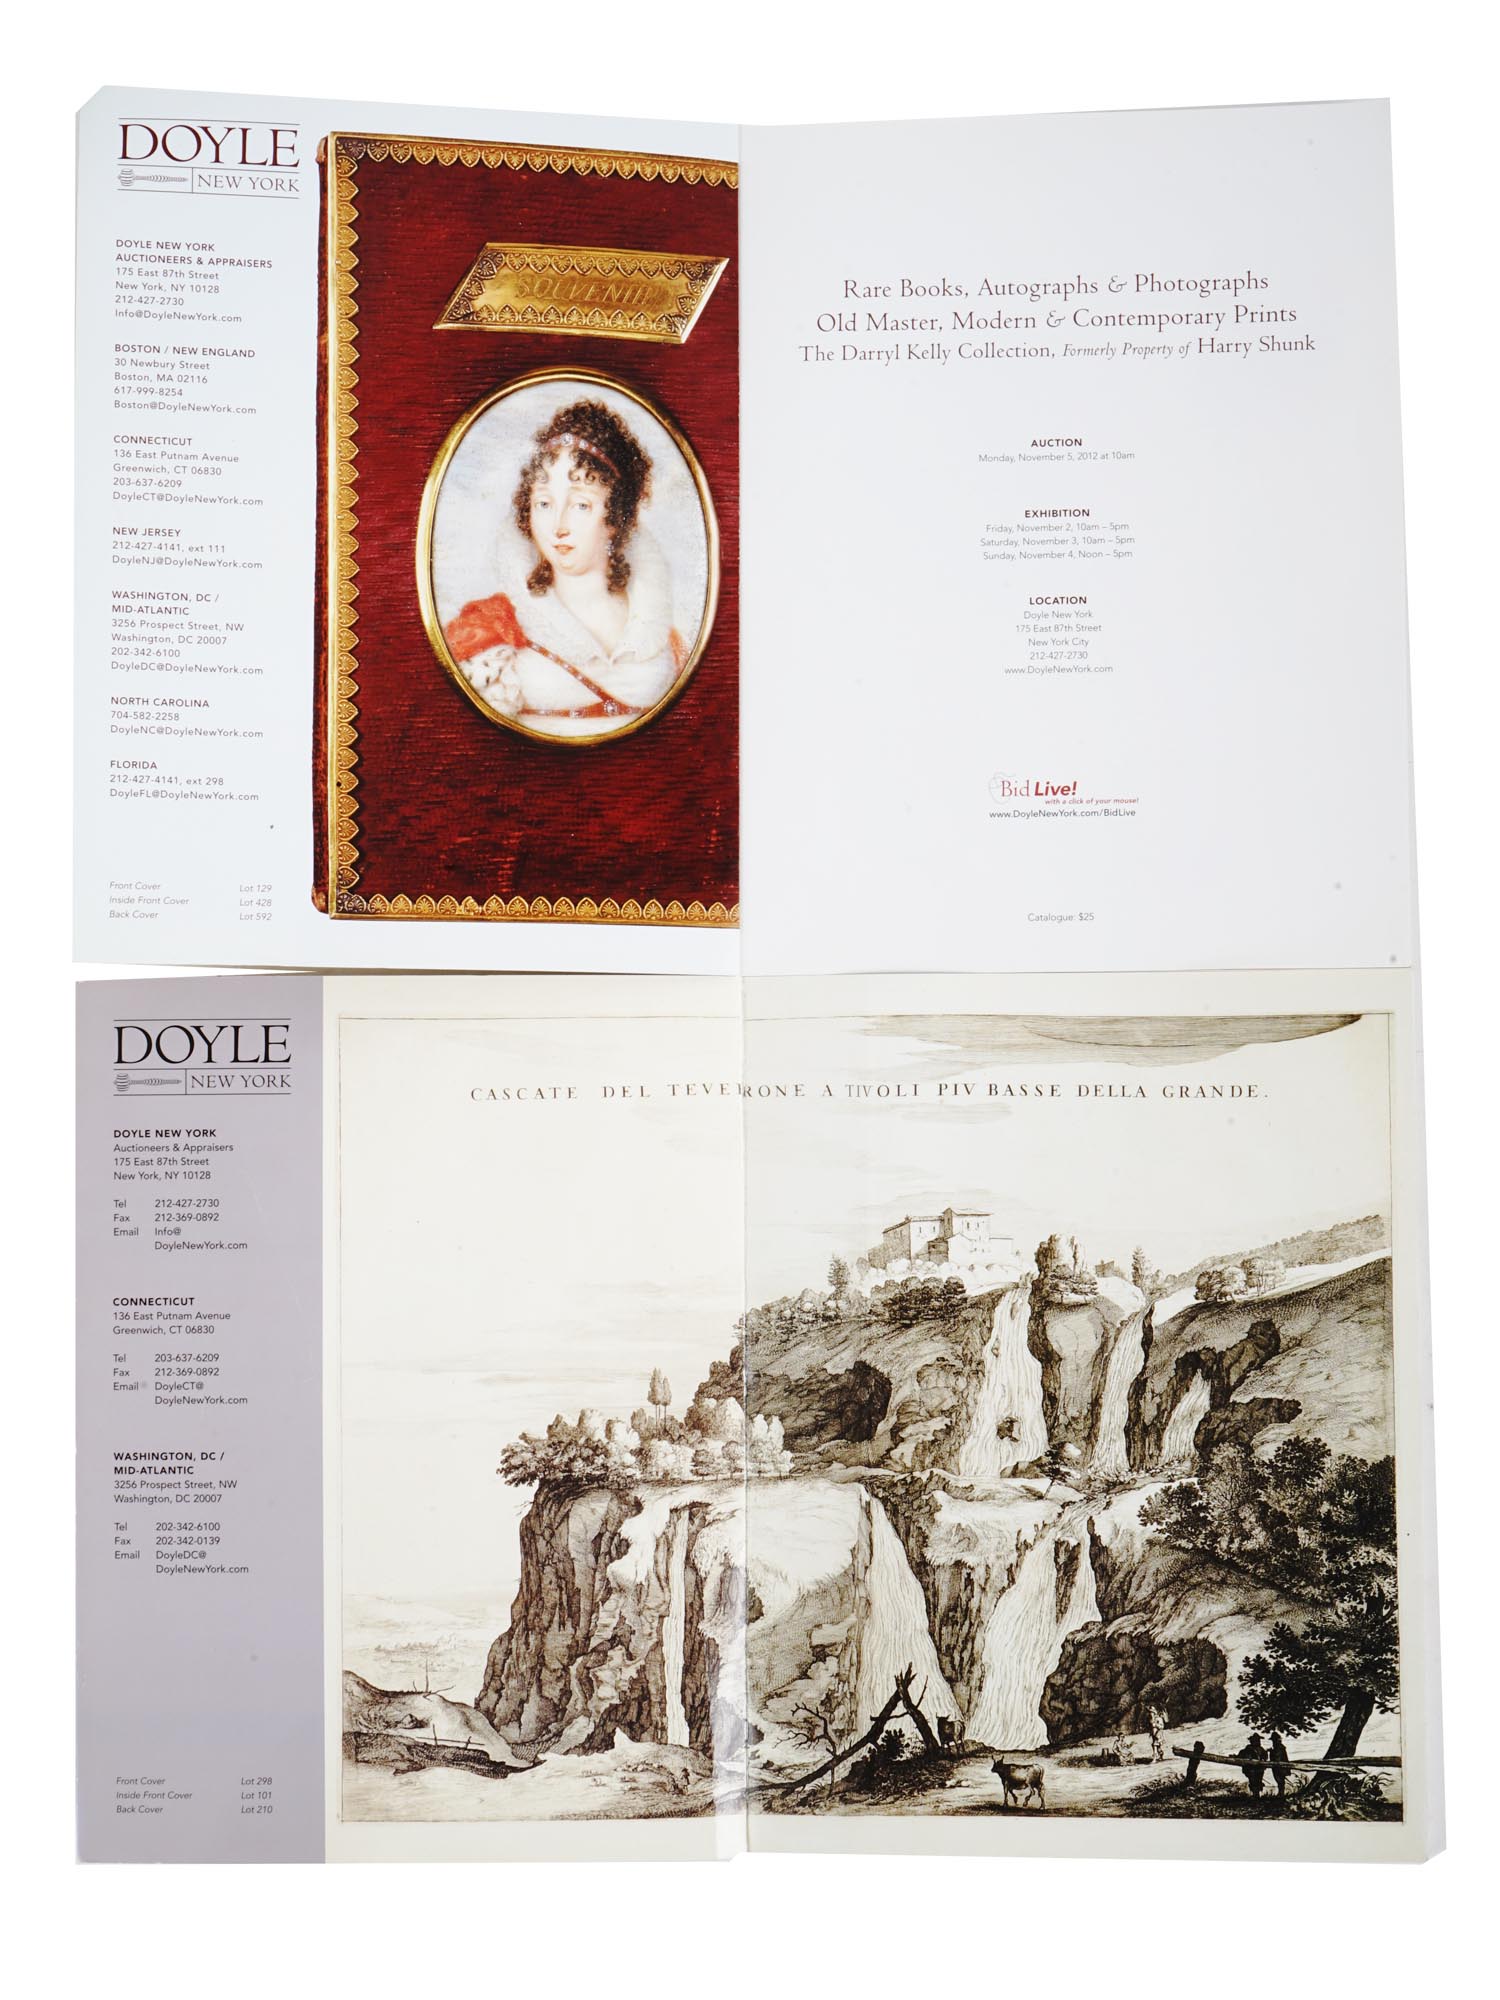 DOYLE AUCTION CATALOGUES RARE BOOKS AND PRINTS PIC-2